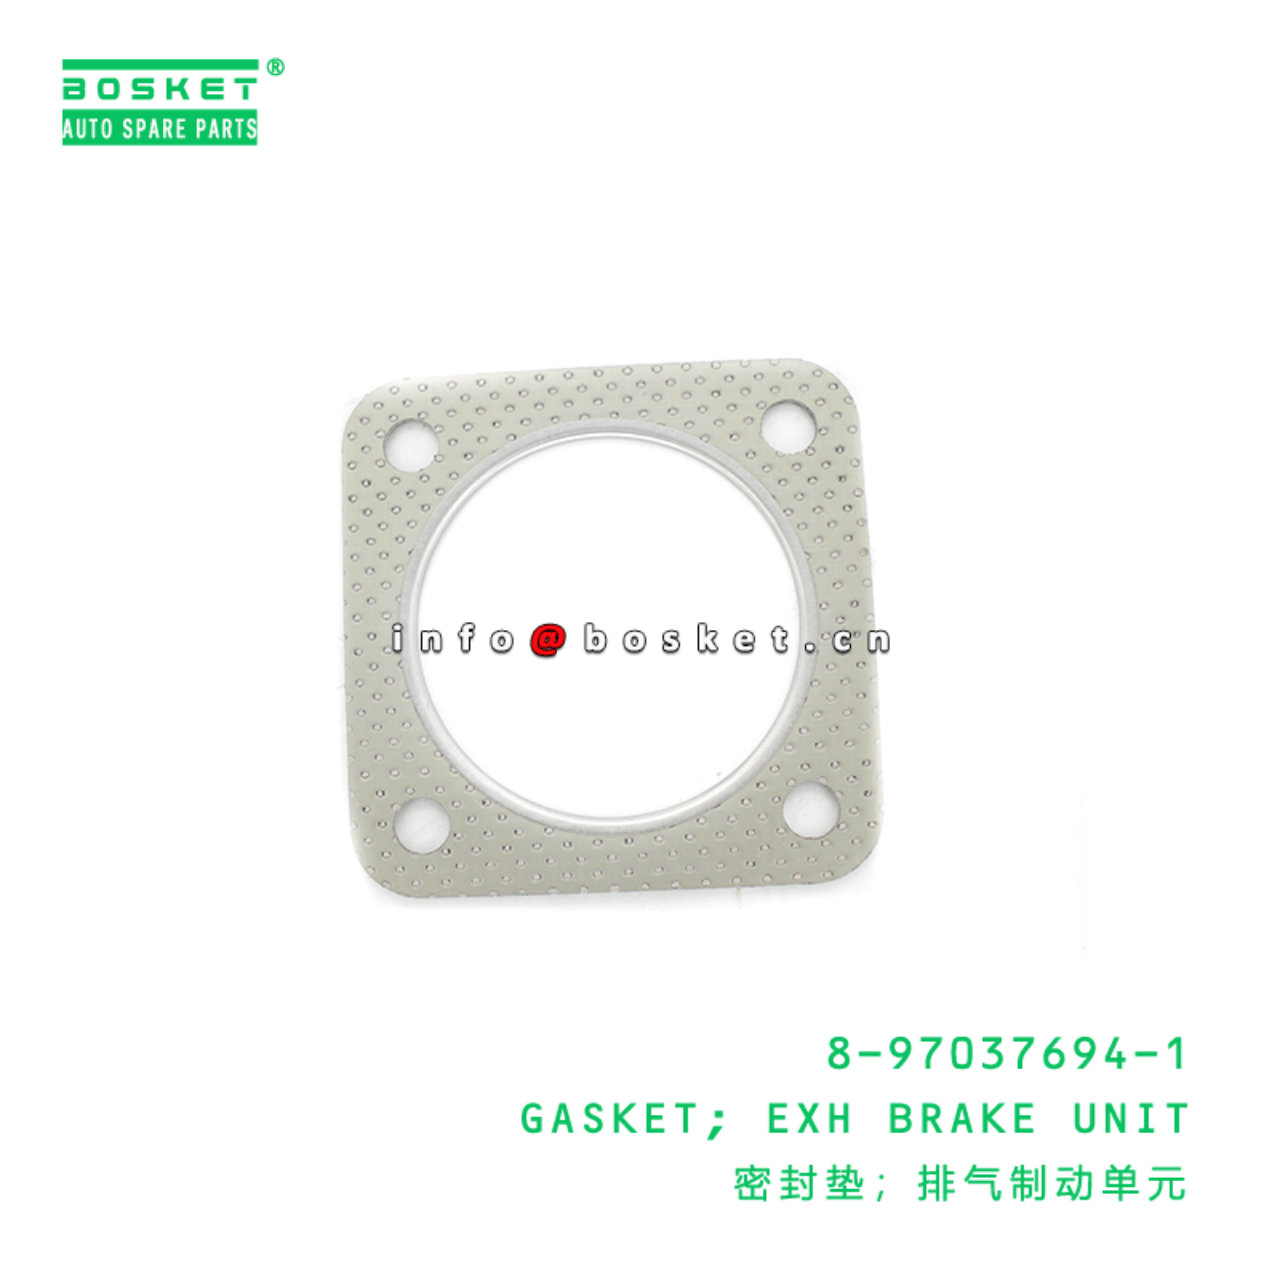 8-97037694-1 Exhaust Brake Unit Gasket 8970376941 Suitable for 